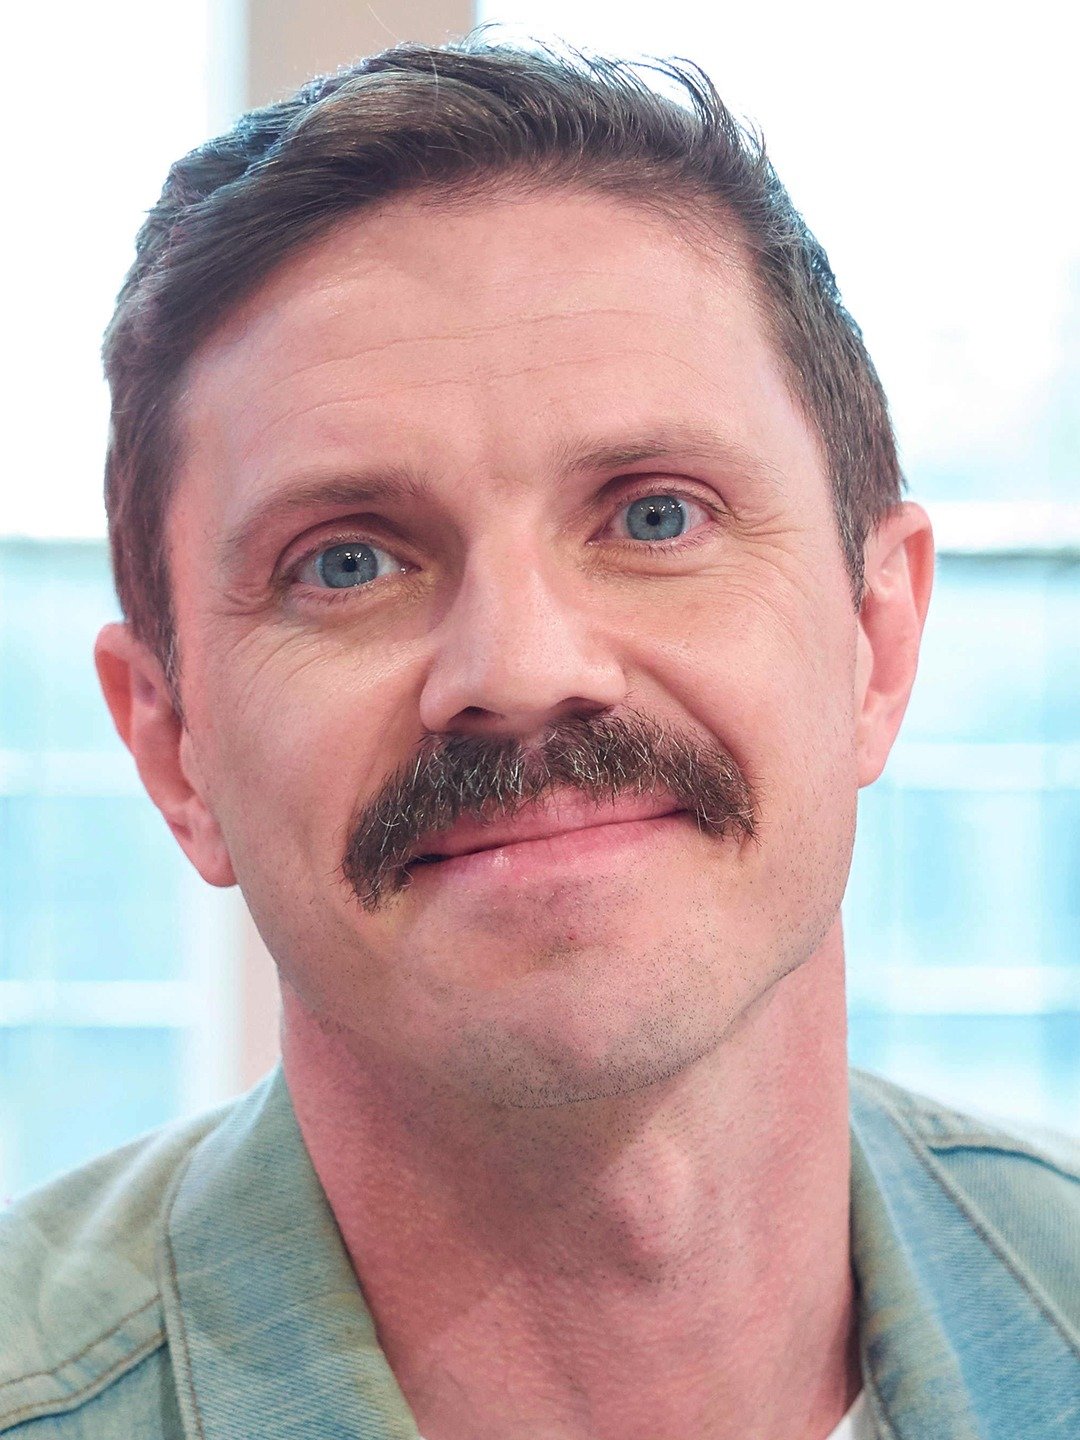 How tall is Jake Shears?